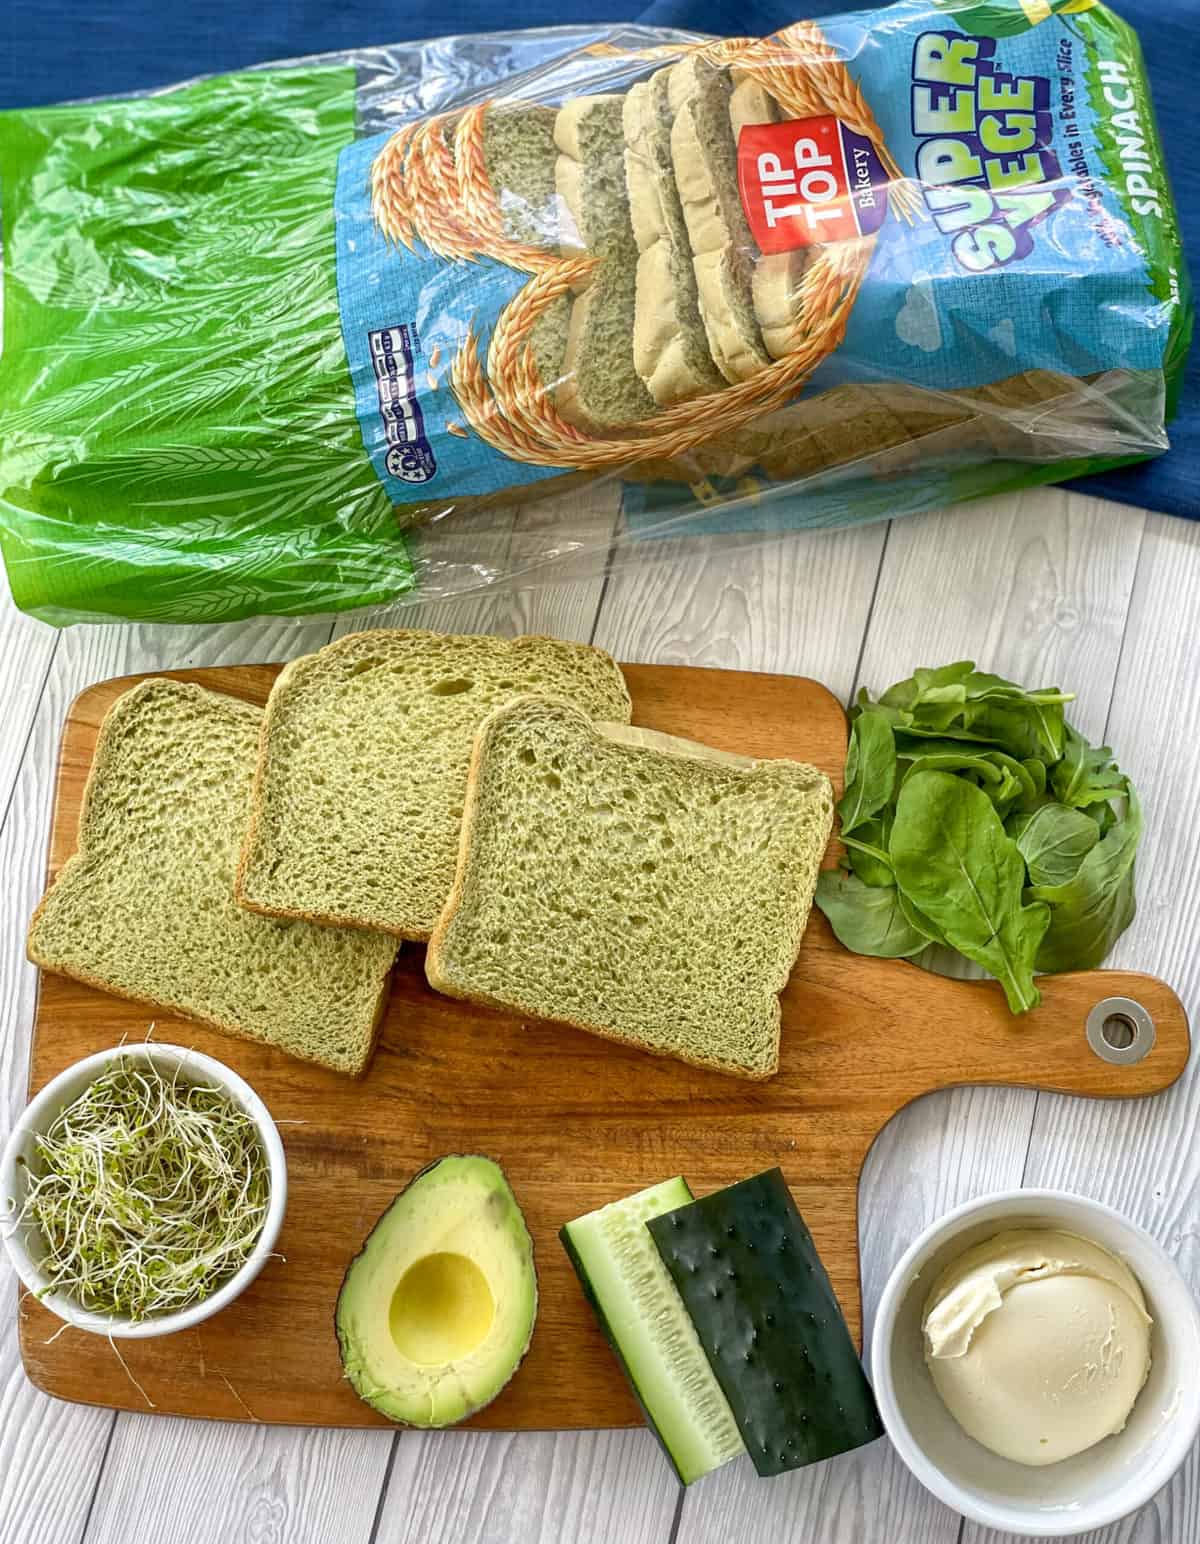 Avocado Vege bread with fillings for pinwheel sandwiches 